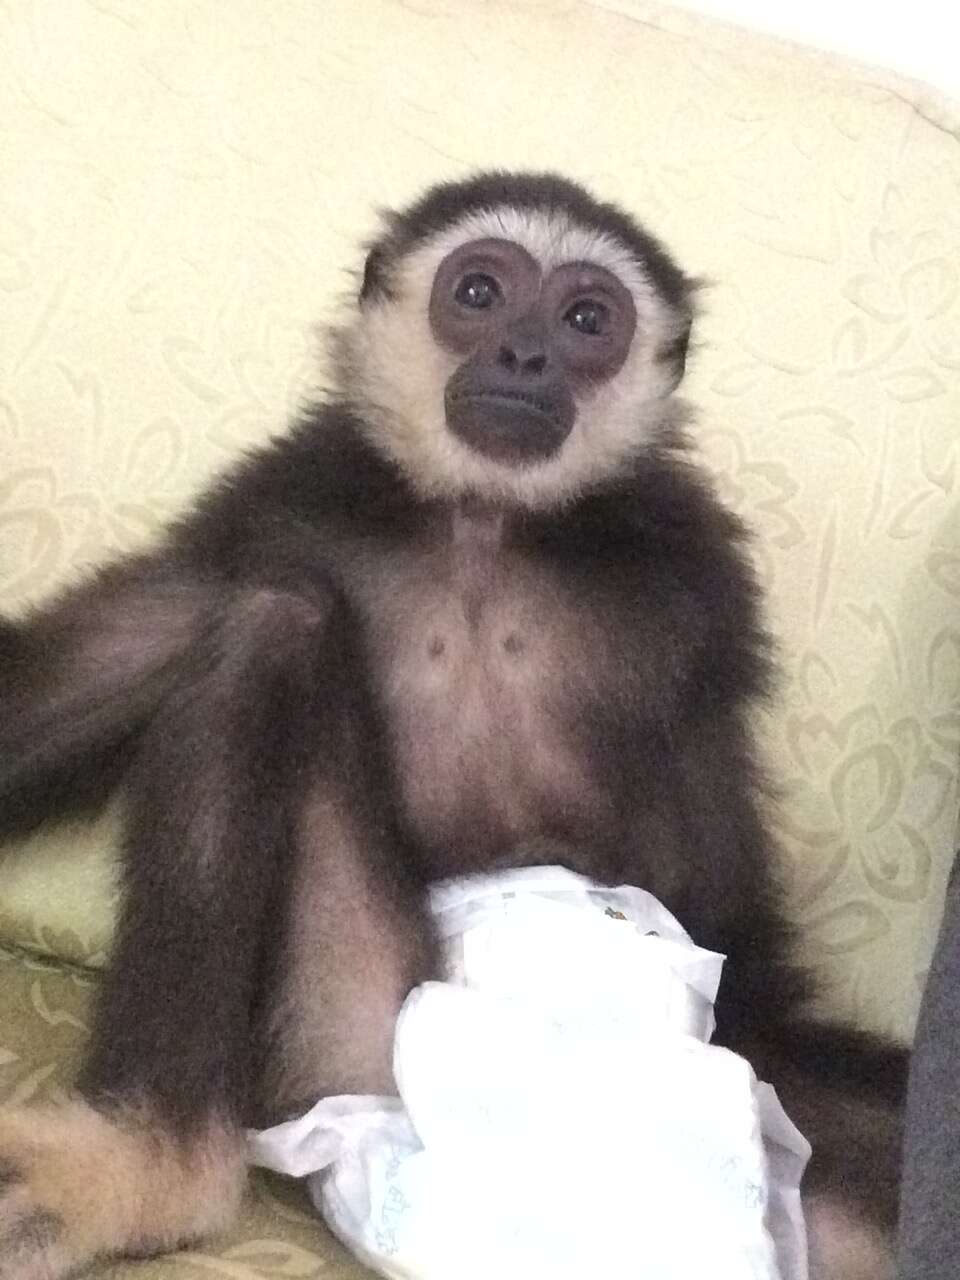 Gibbon sitting on floor with diaper on